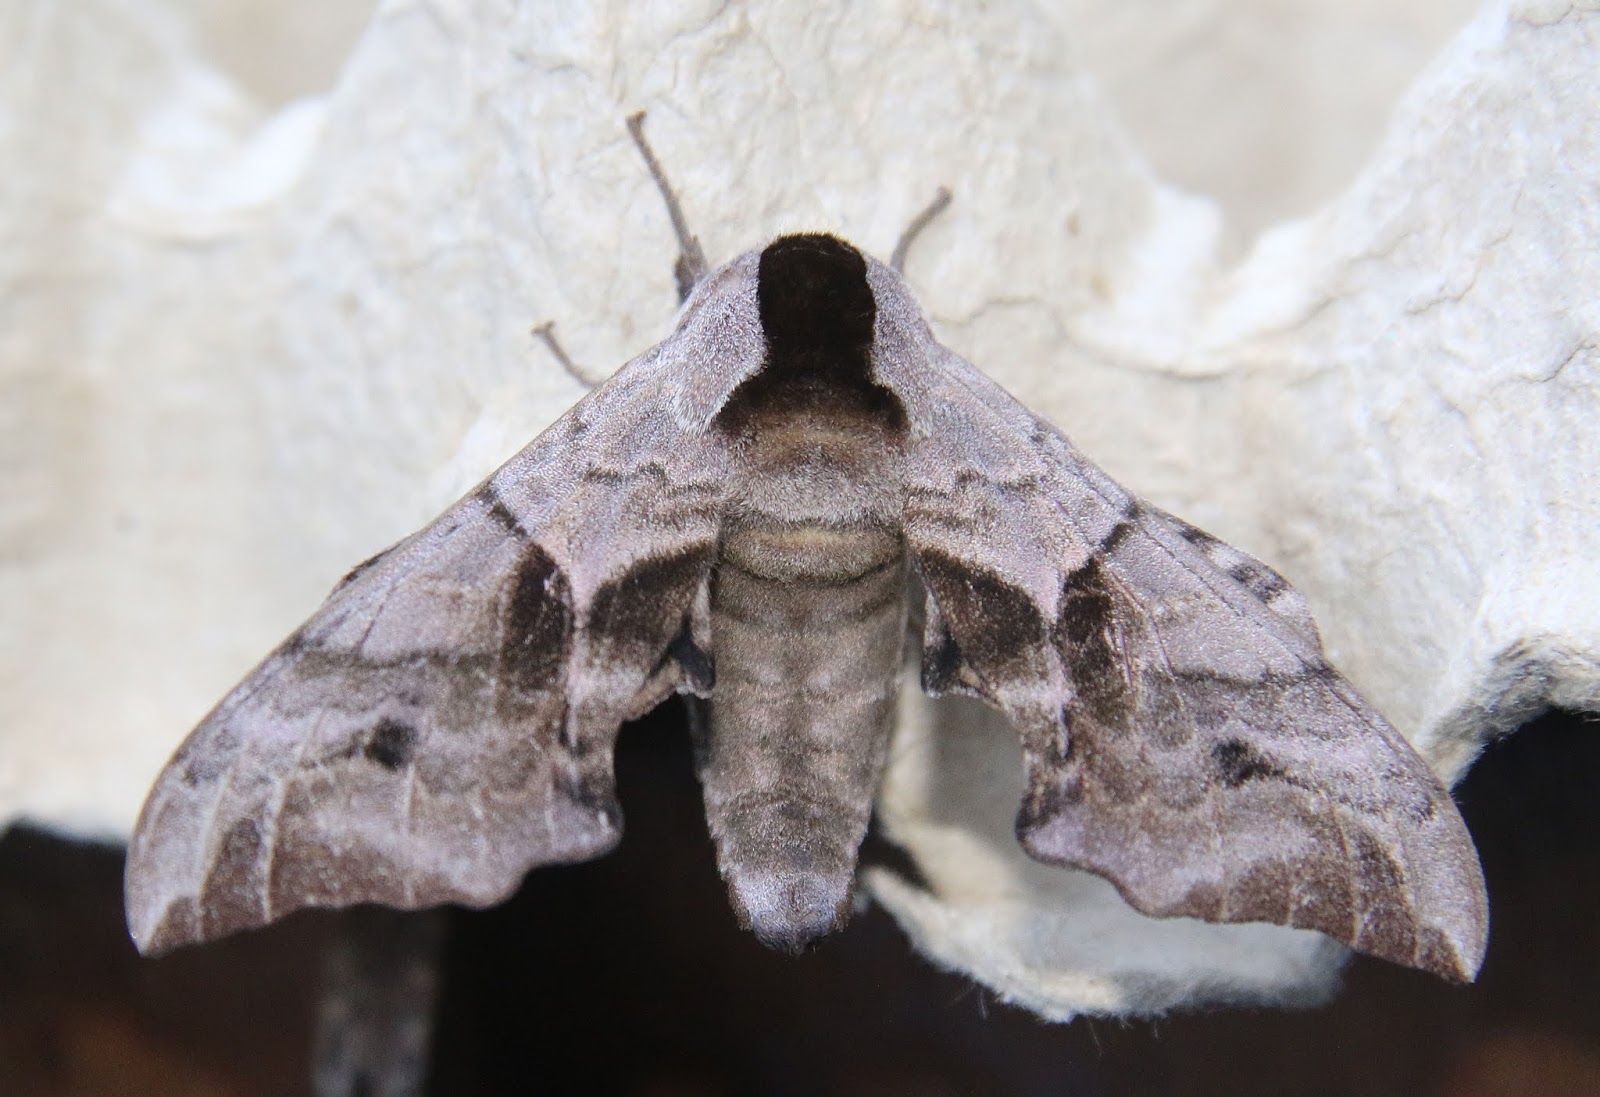 The best moth traps